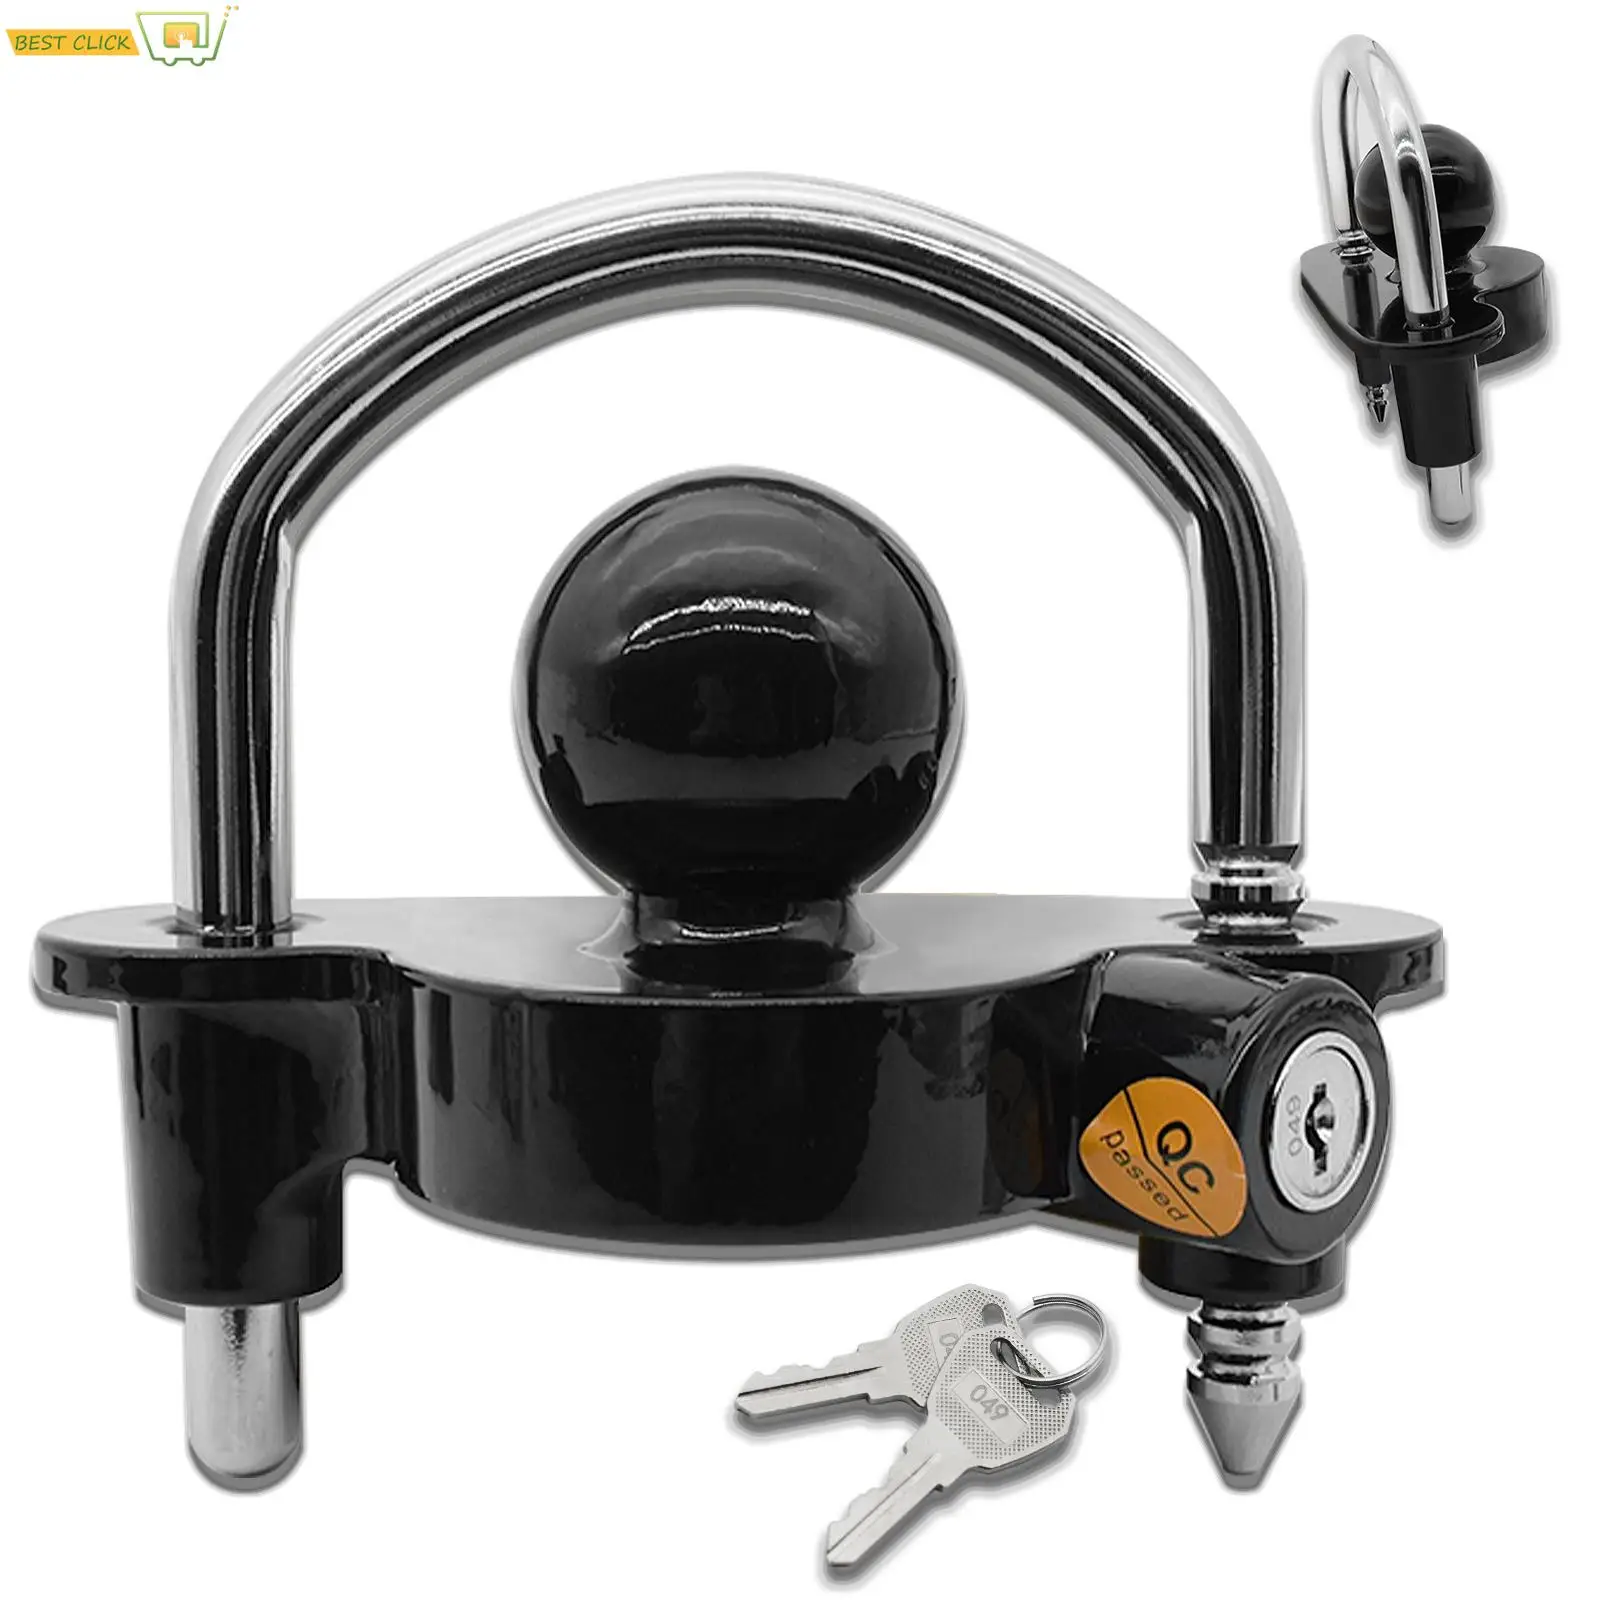 Trailer Coupler Hitch Lock Auto Parts Universal Tow Ball Safe Security Anti-Theft Lock Heavy-Duty Hook Caravan Accessories